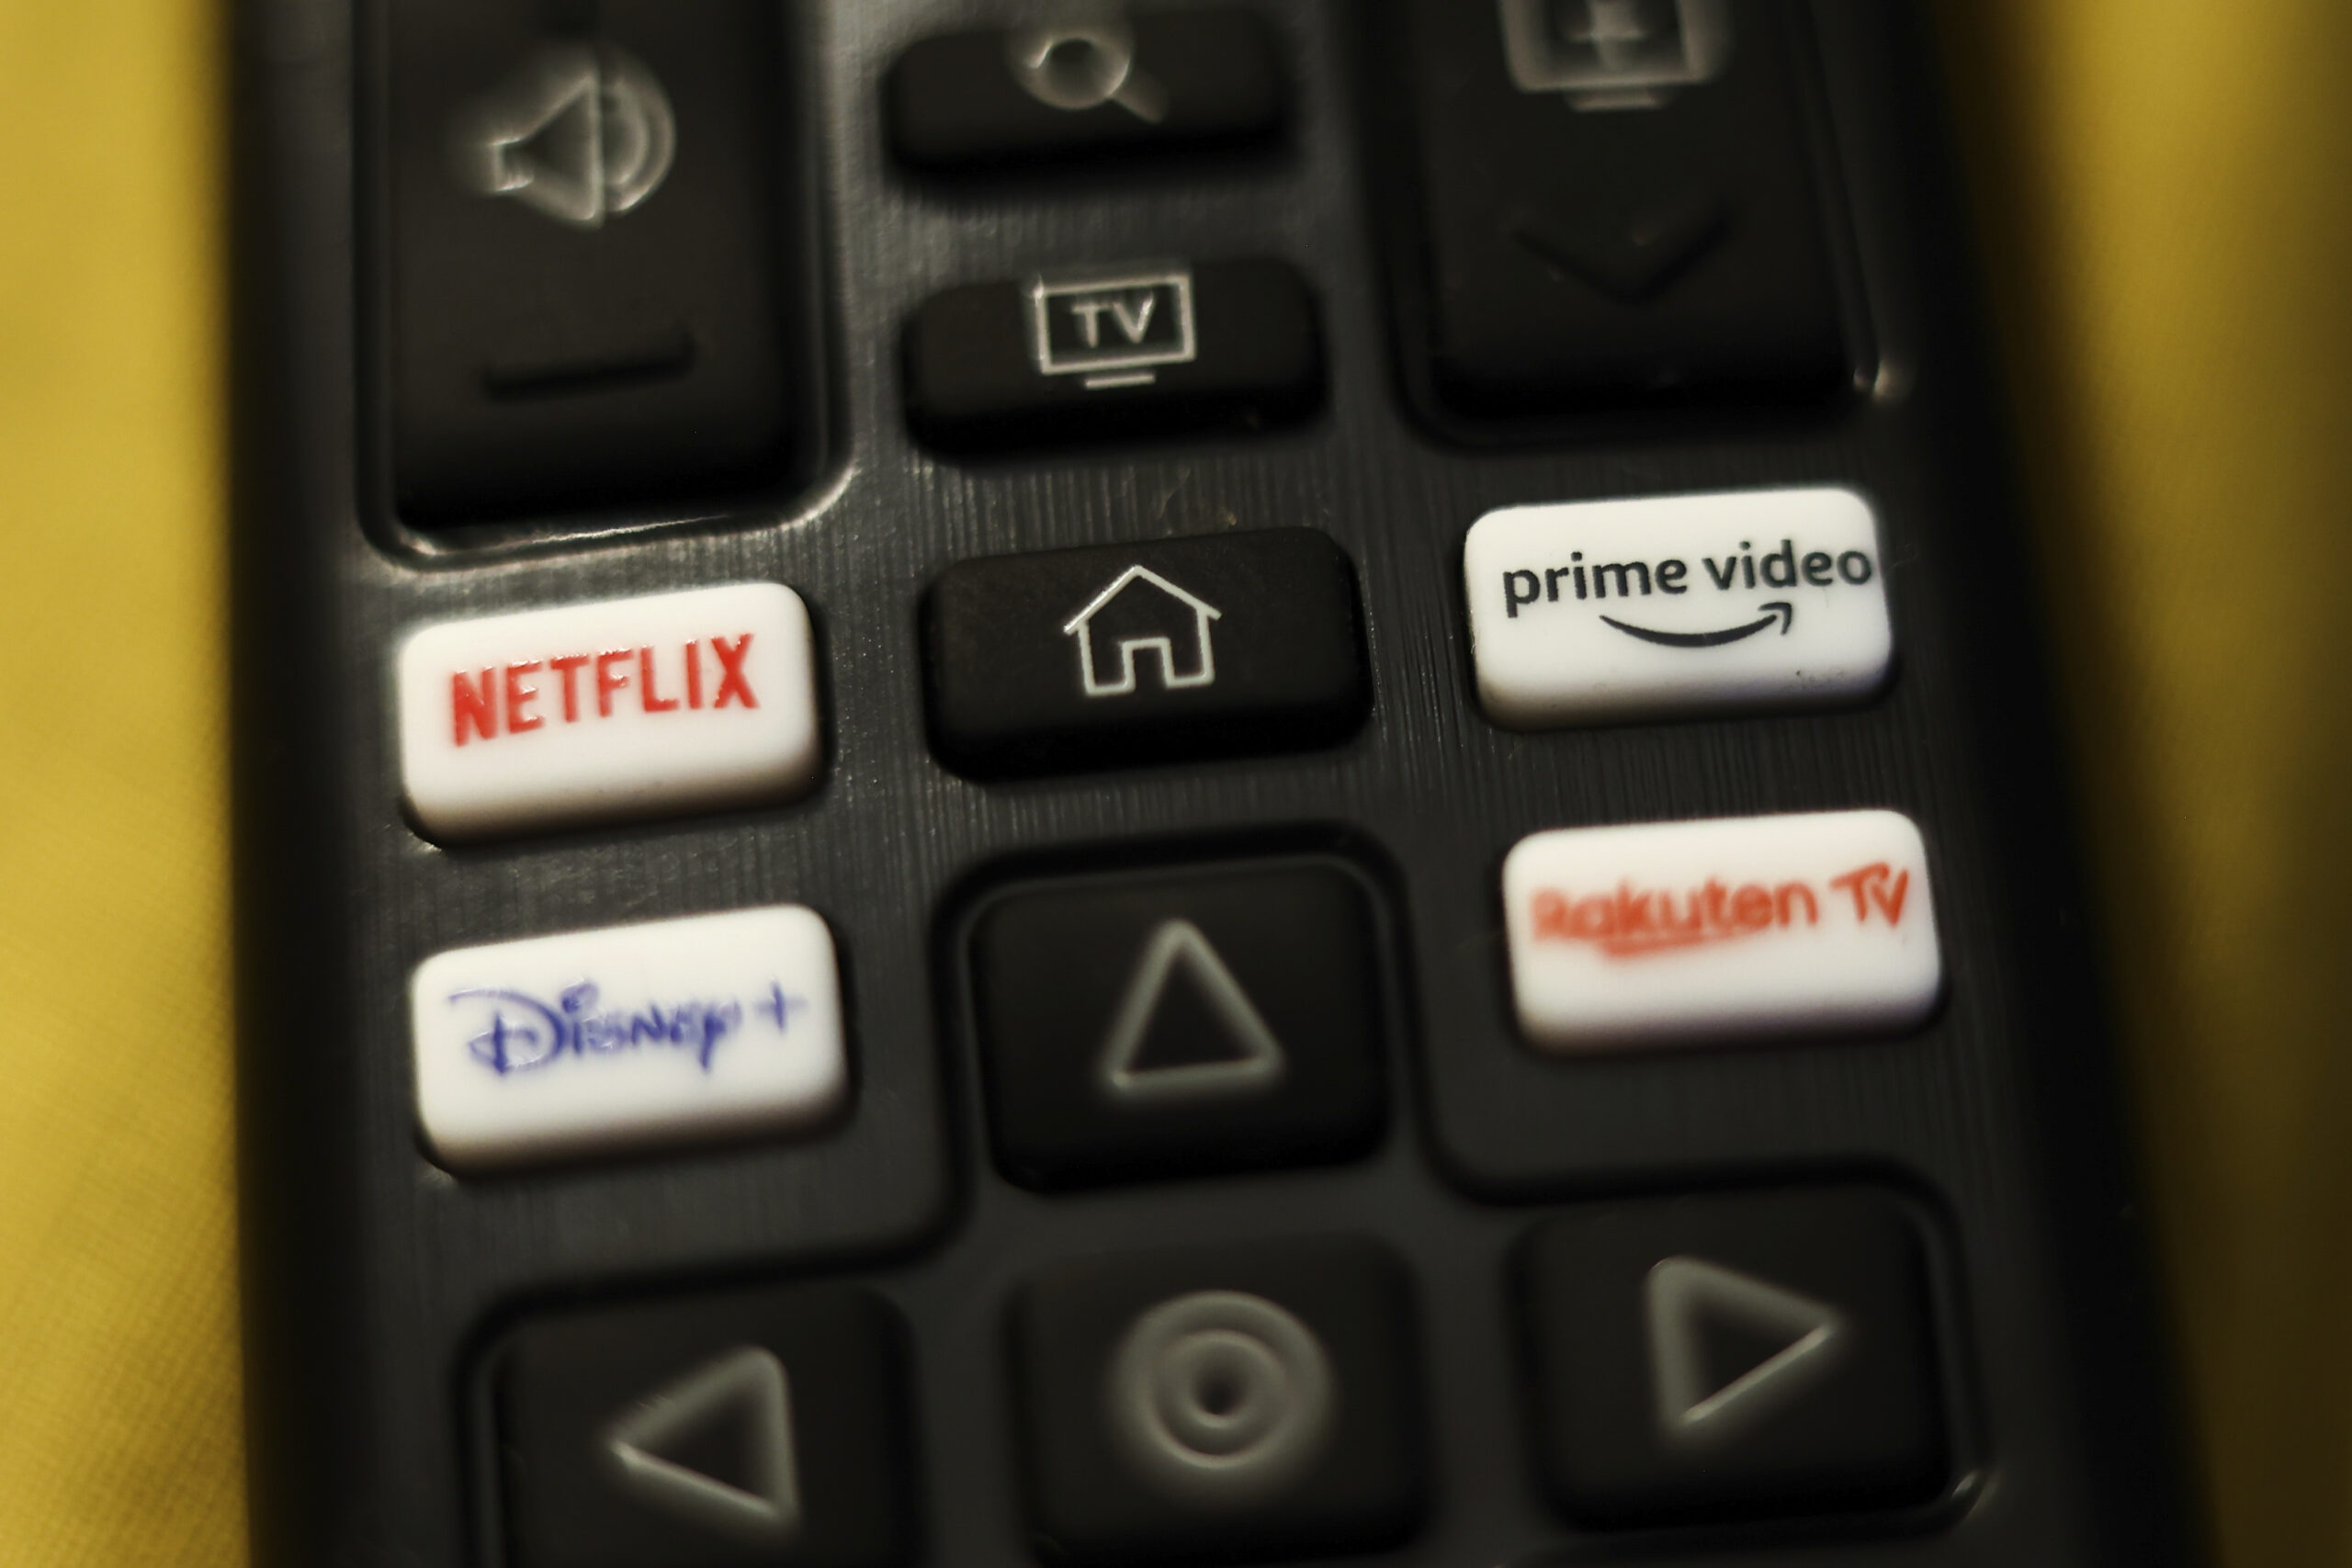 Massachusetts lawmakers are considering legislation that advocates say would make it the first state in the nation to levy fees on streaming companies like Netflix in order to help fund community media